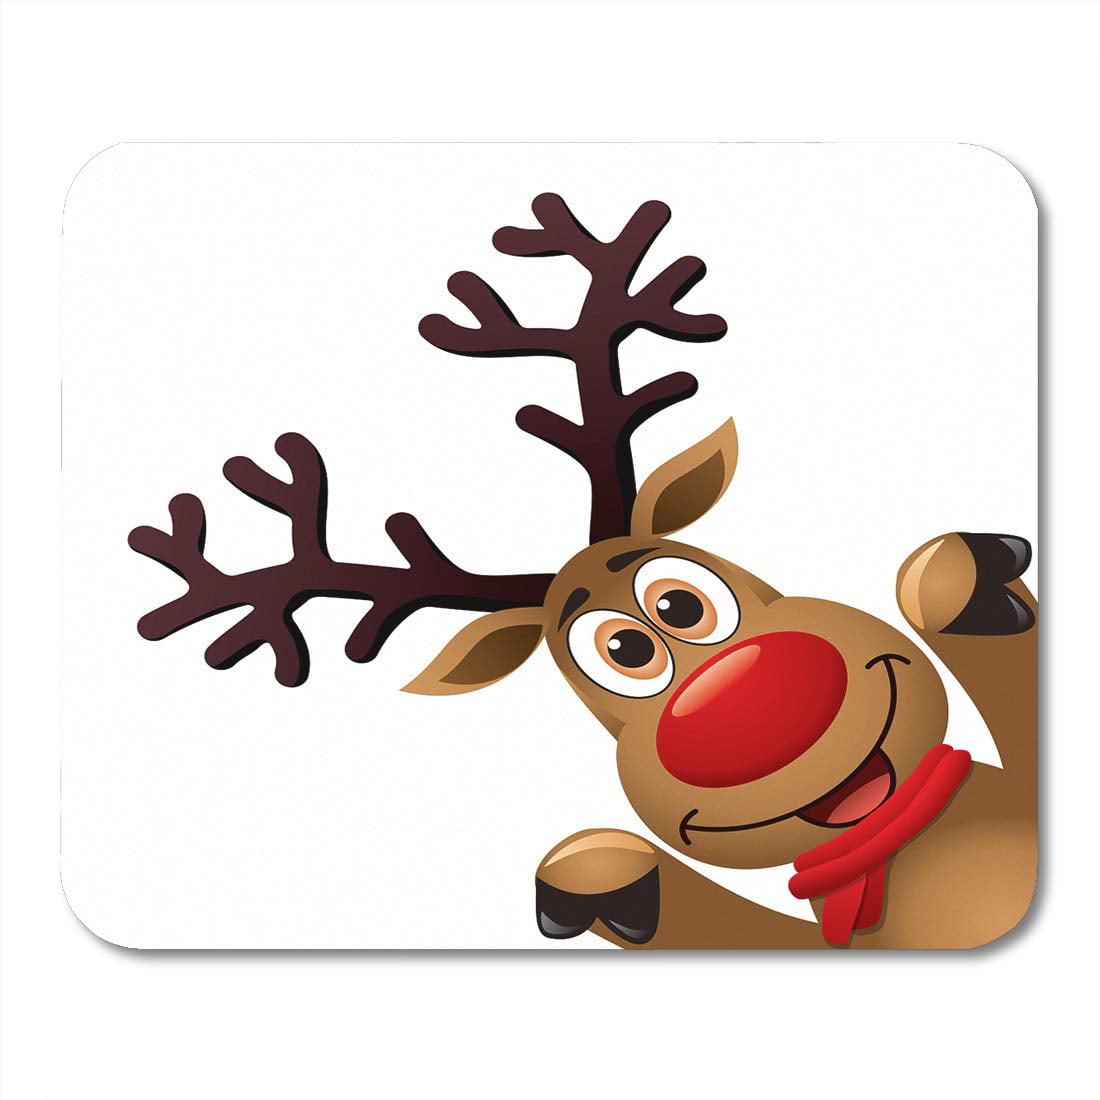 SIDONKU Xmas Drawing of Funny Red Nosed Reindeer Christmas Cartoon Rudolph  Deer Scarf and Big Horns on Blank Copy Mousepad Mouse Pad Mouse Mat 9x10  inch 